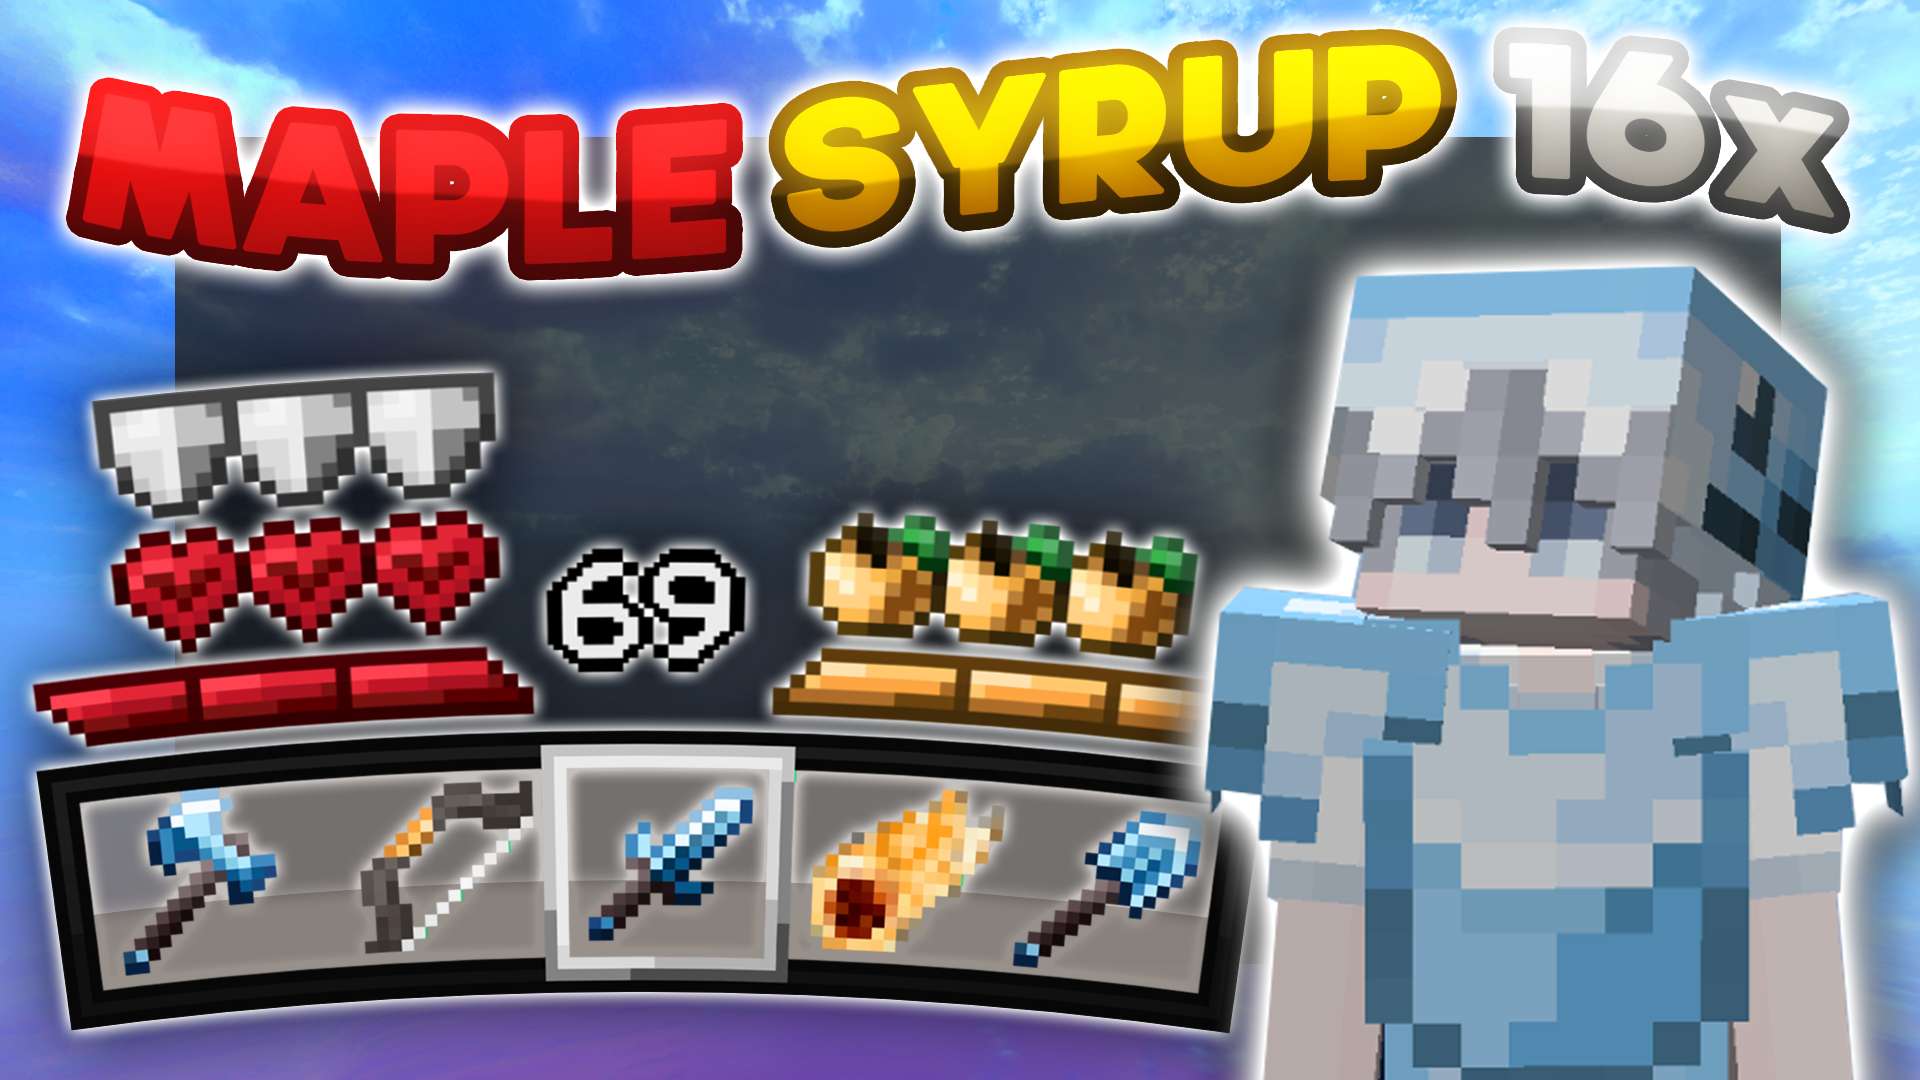 MAPLE SYRUP 16x by SeaRavioli on PvPRP